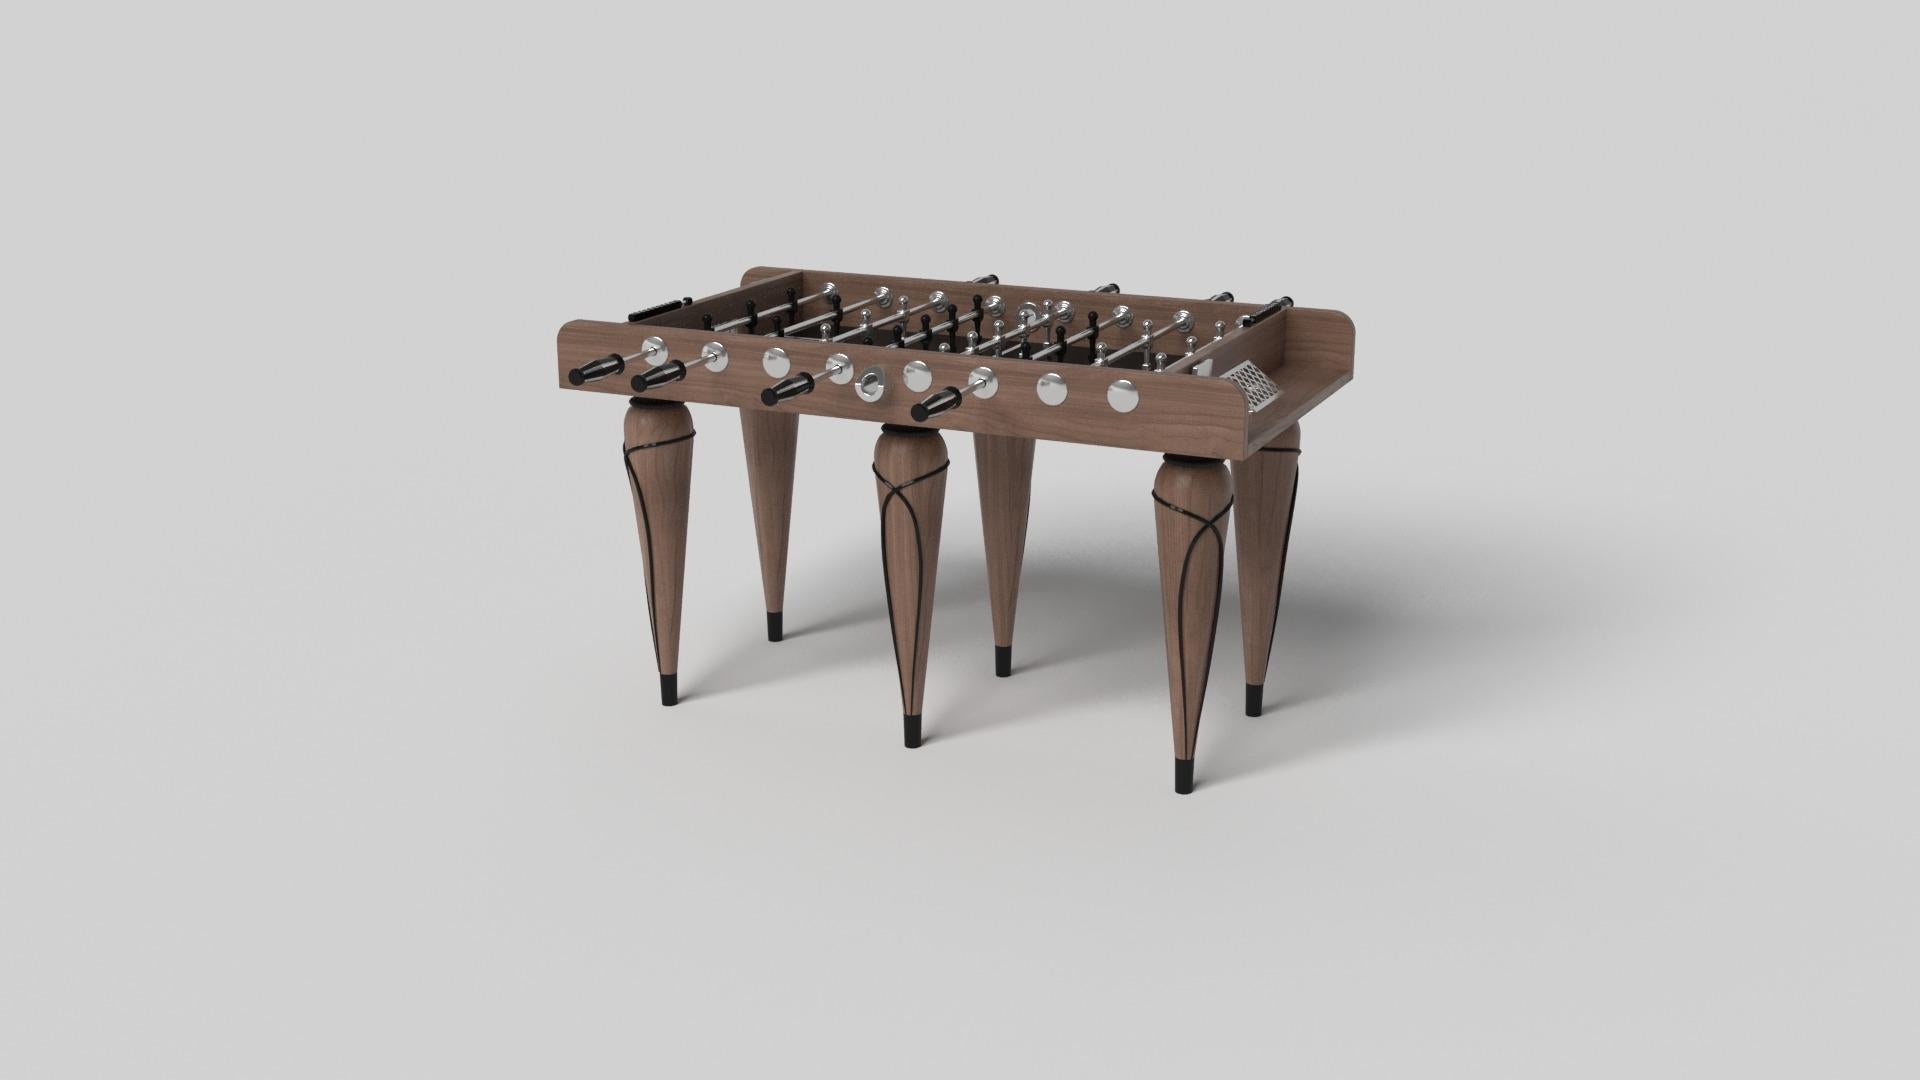 Champagne gold accents add undeniable elegance to this luxury foosball table. Offering superior playability and uncompromised style, this design features hand carved details, decorative metal elements, and metal sabots at the bottom of each leg. The